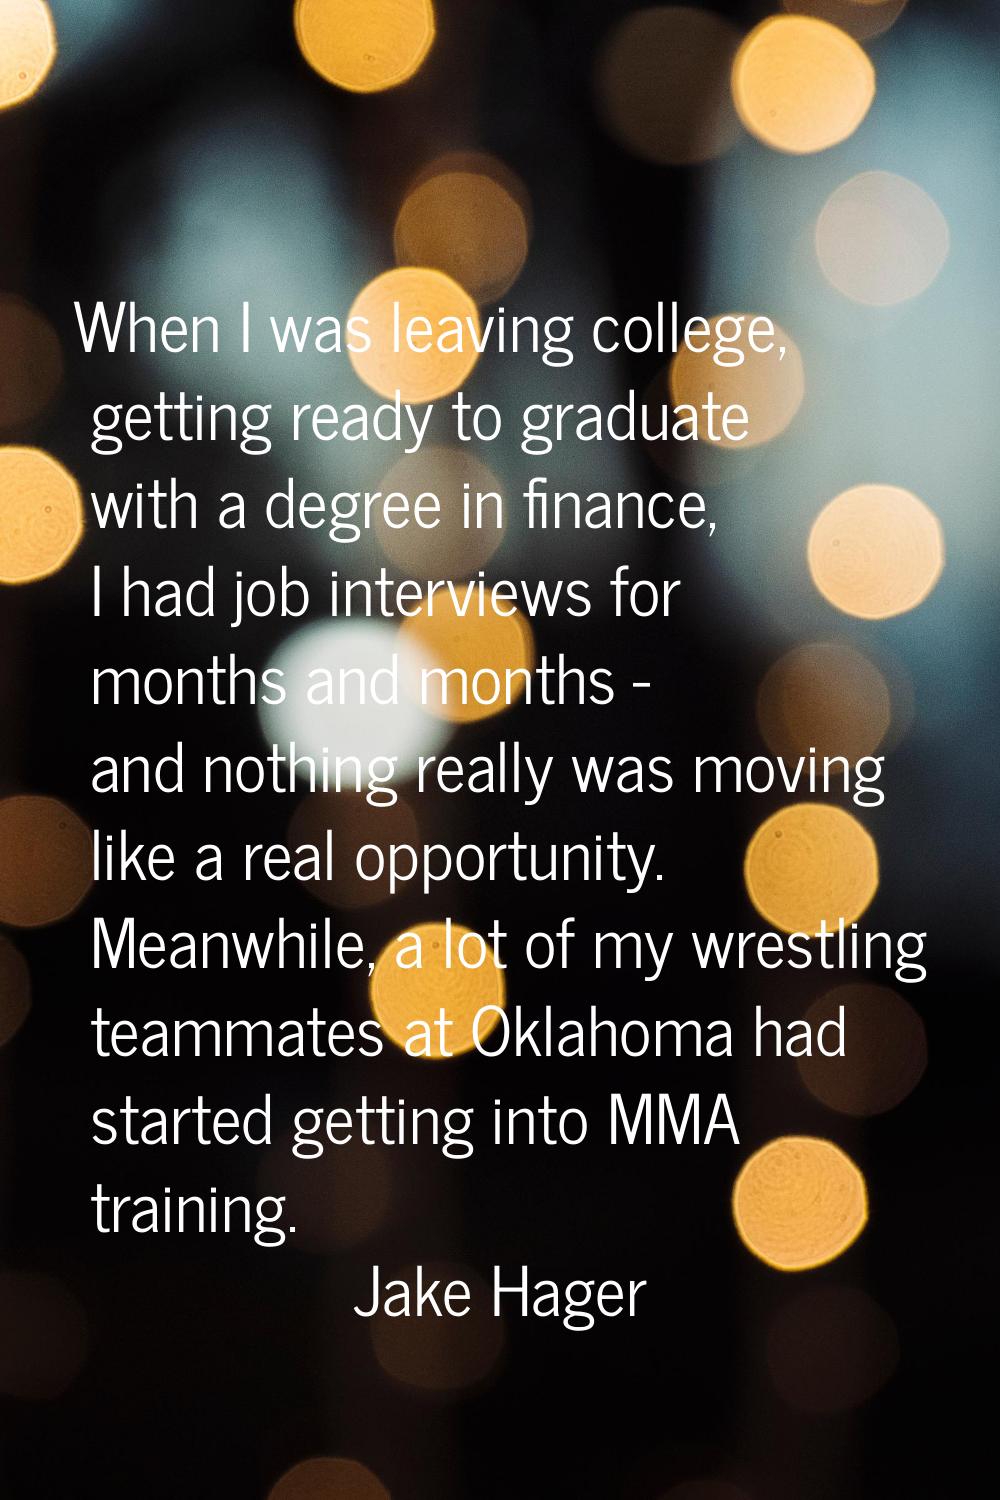 When I was leaving college, getting ready to graduate with a degree in finance, I had job interview